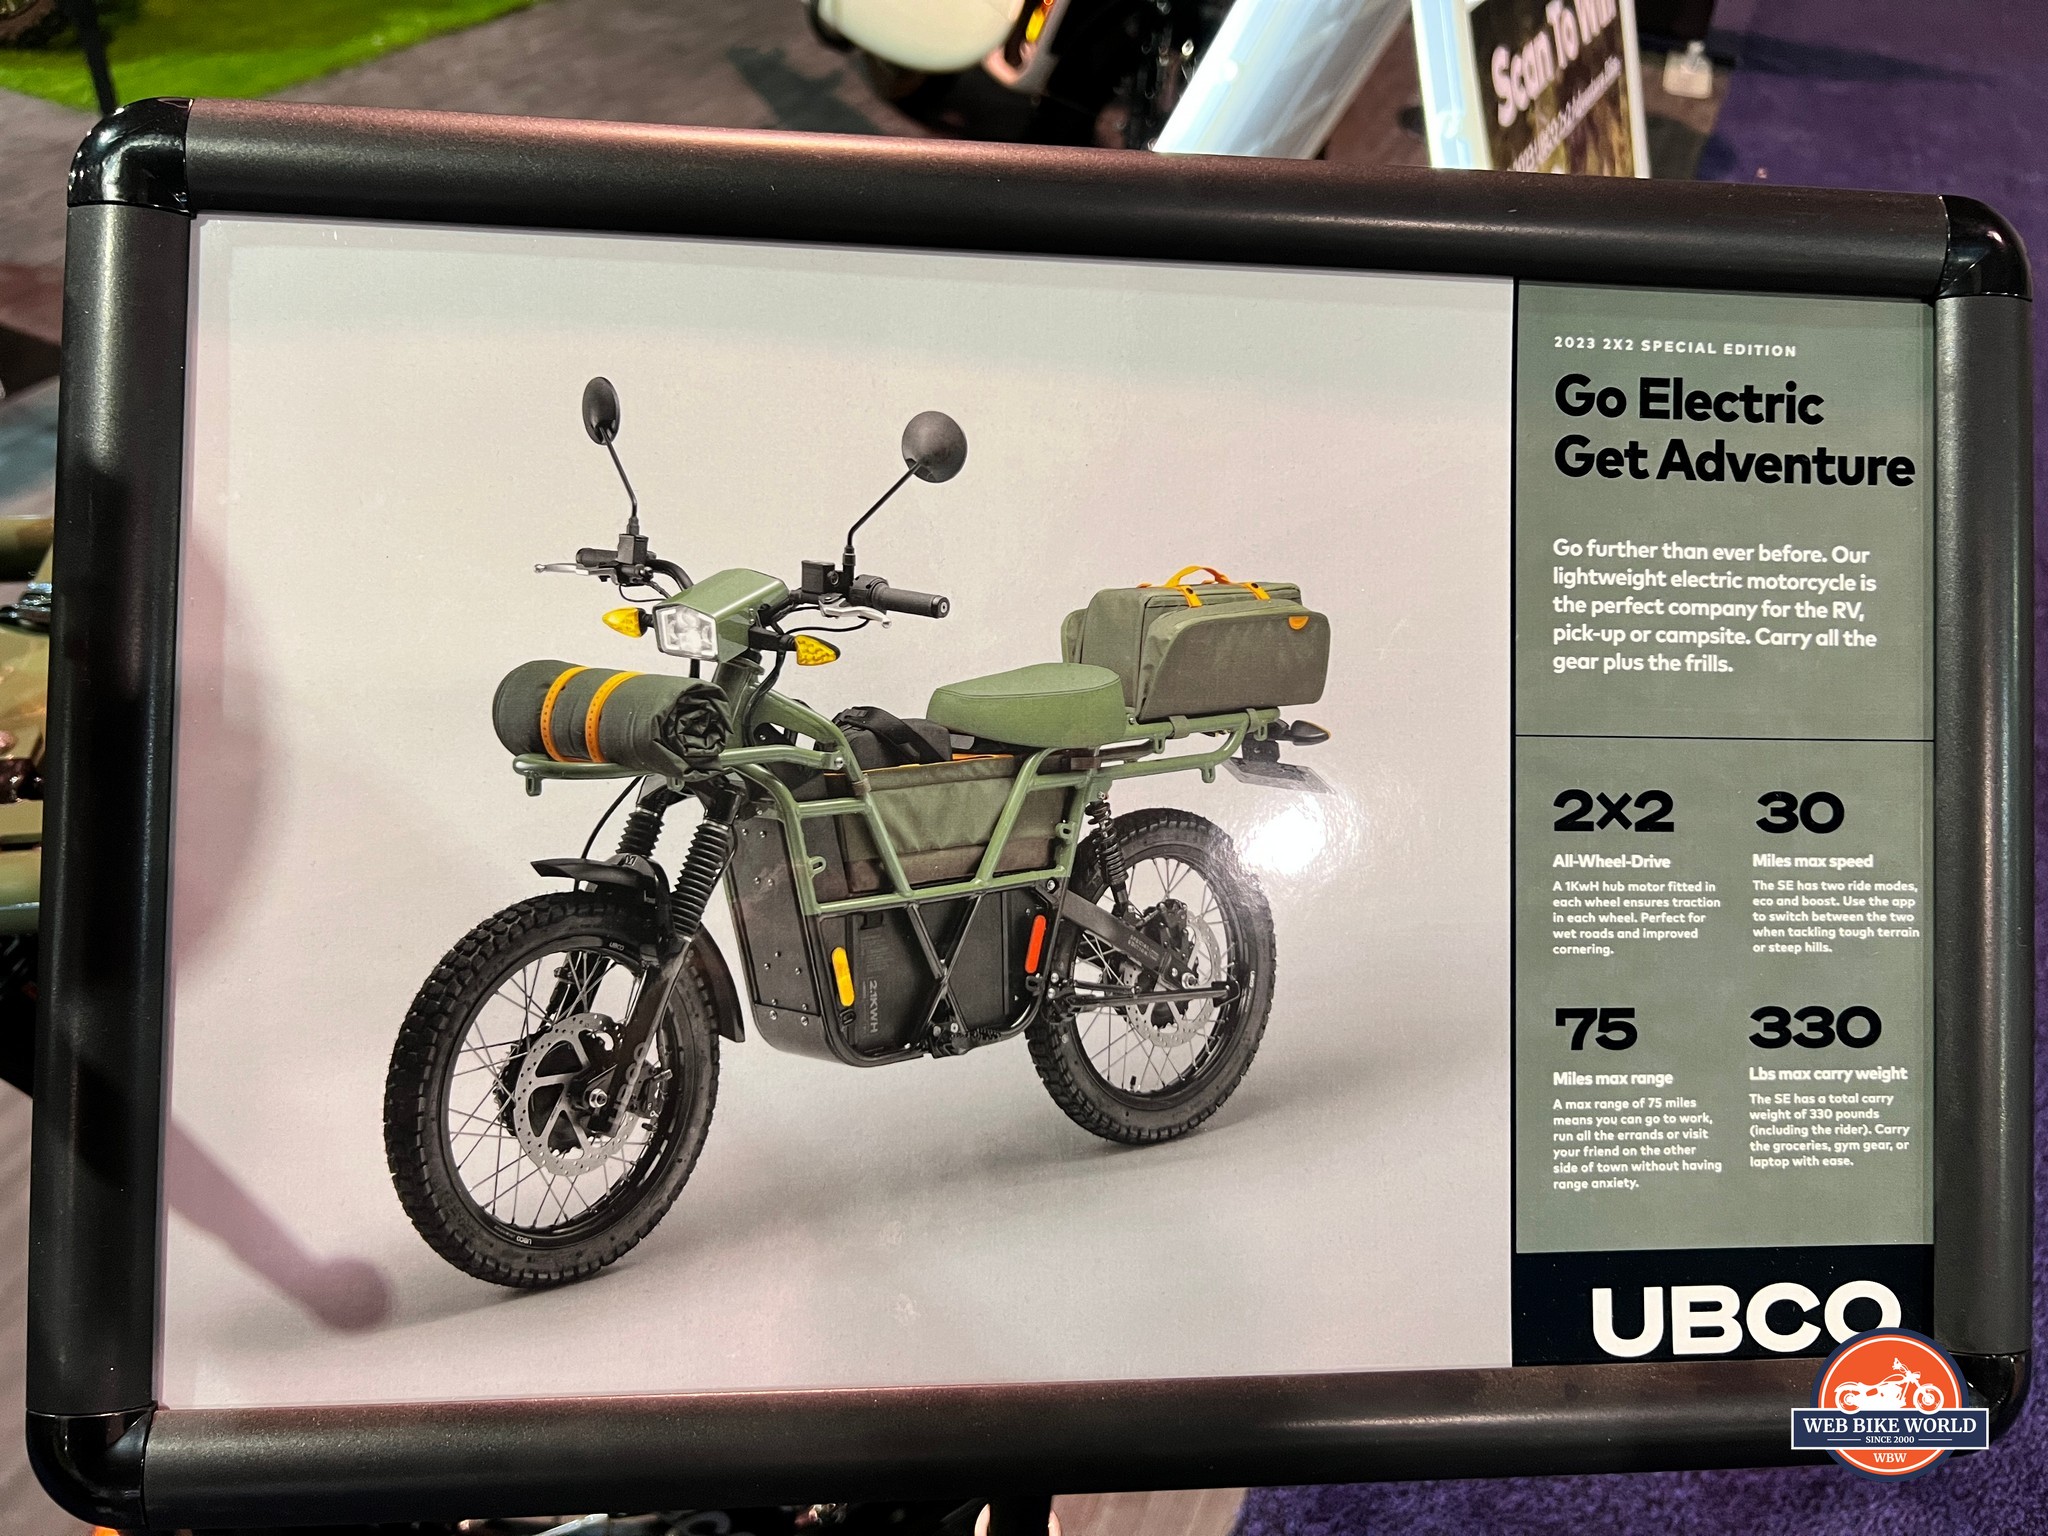 UBCO's AWD electric motorcycle.